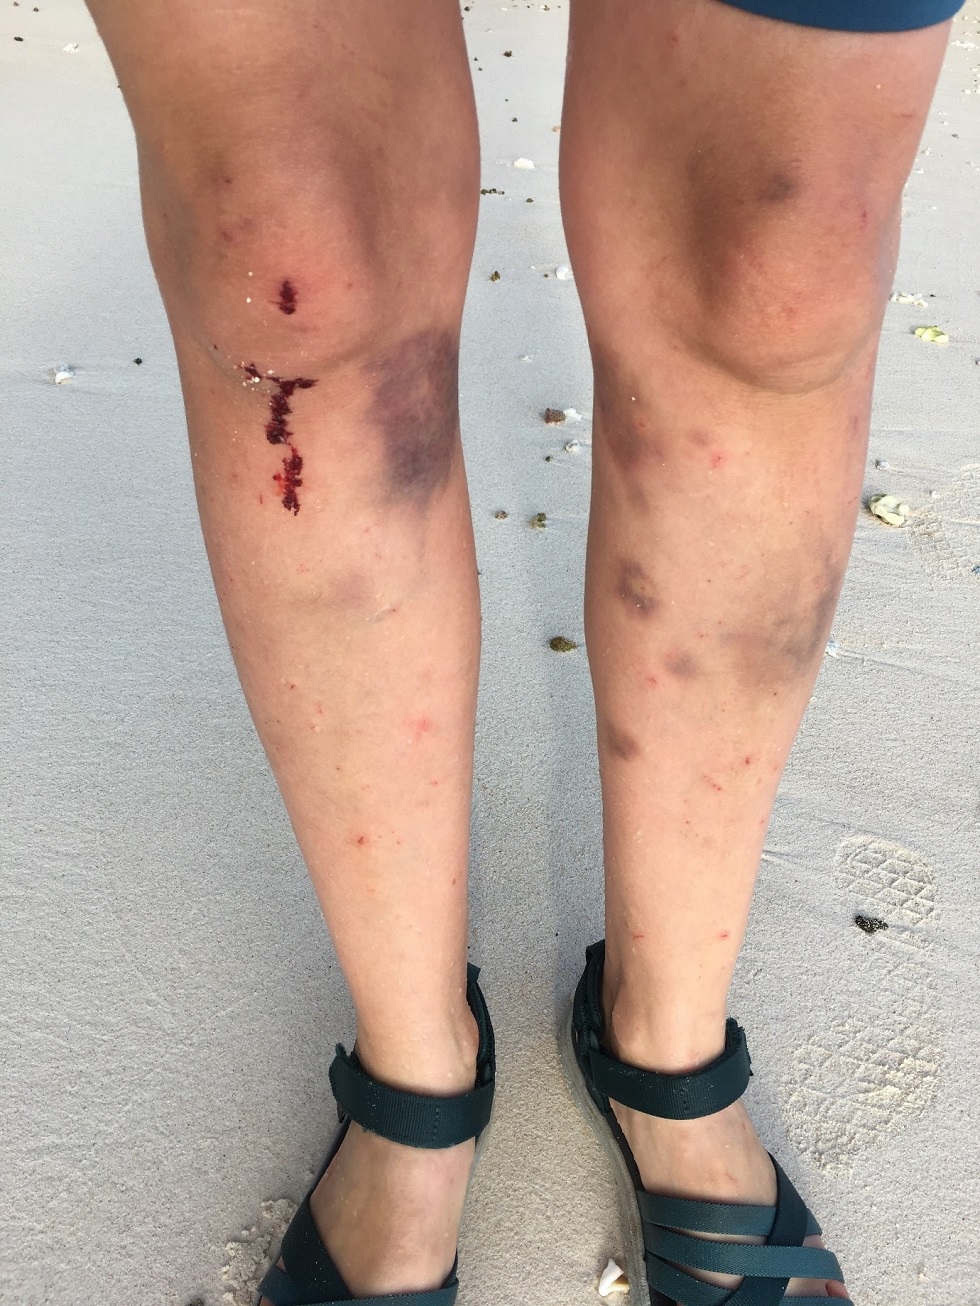 An expeditioner's legs after crossing the island